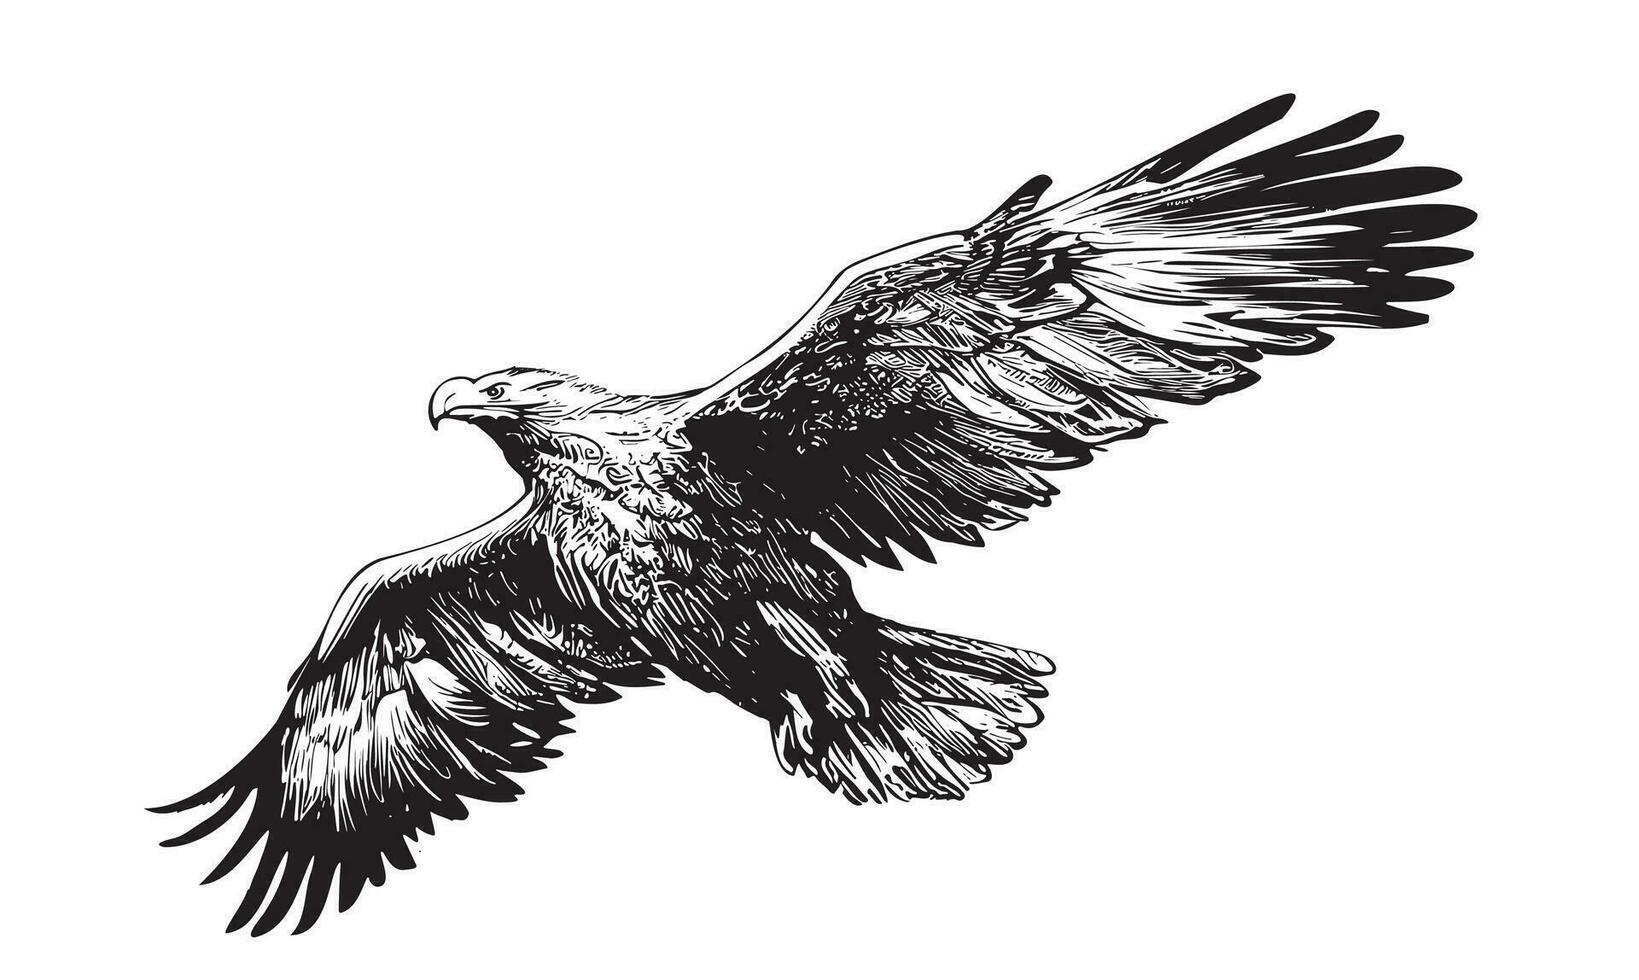 Eagle flying isolated on white background hand drawn sketch Vector illustration